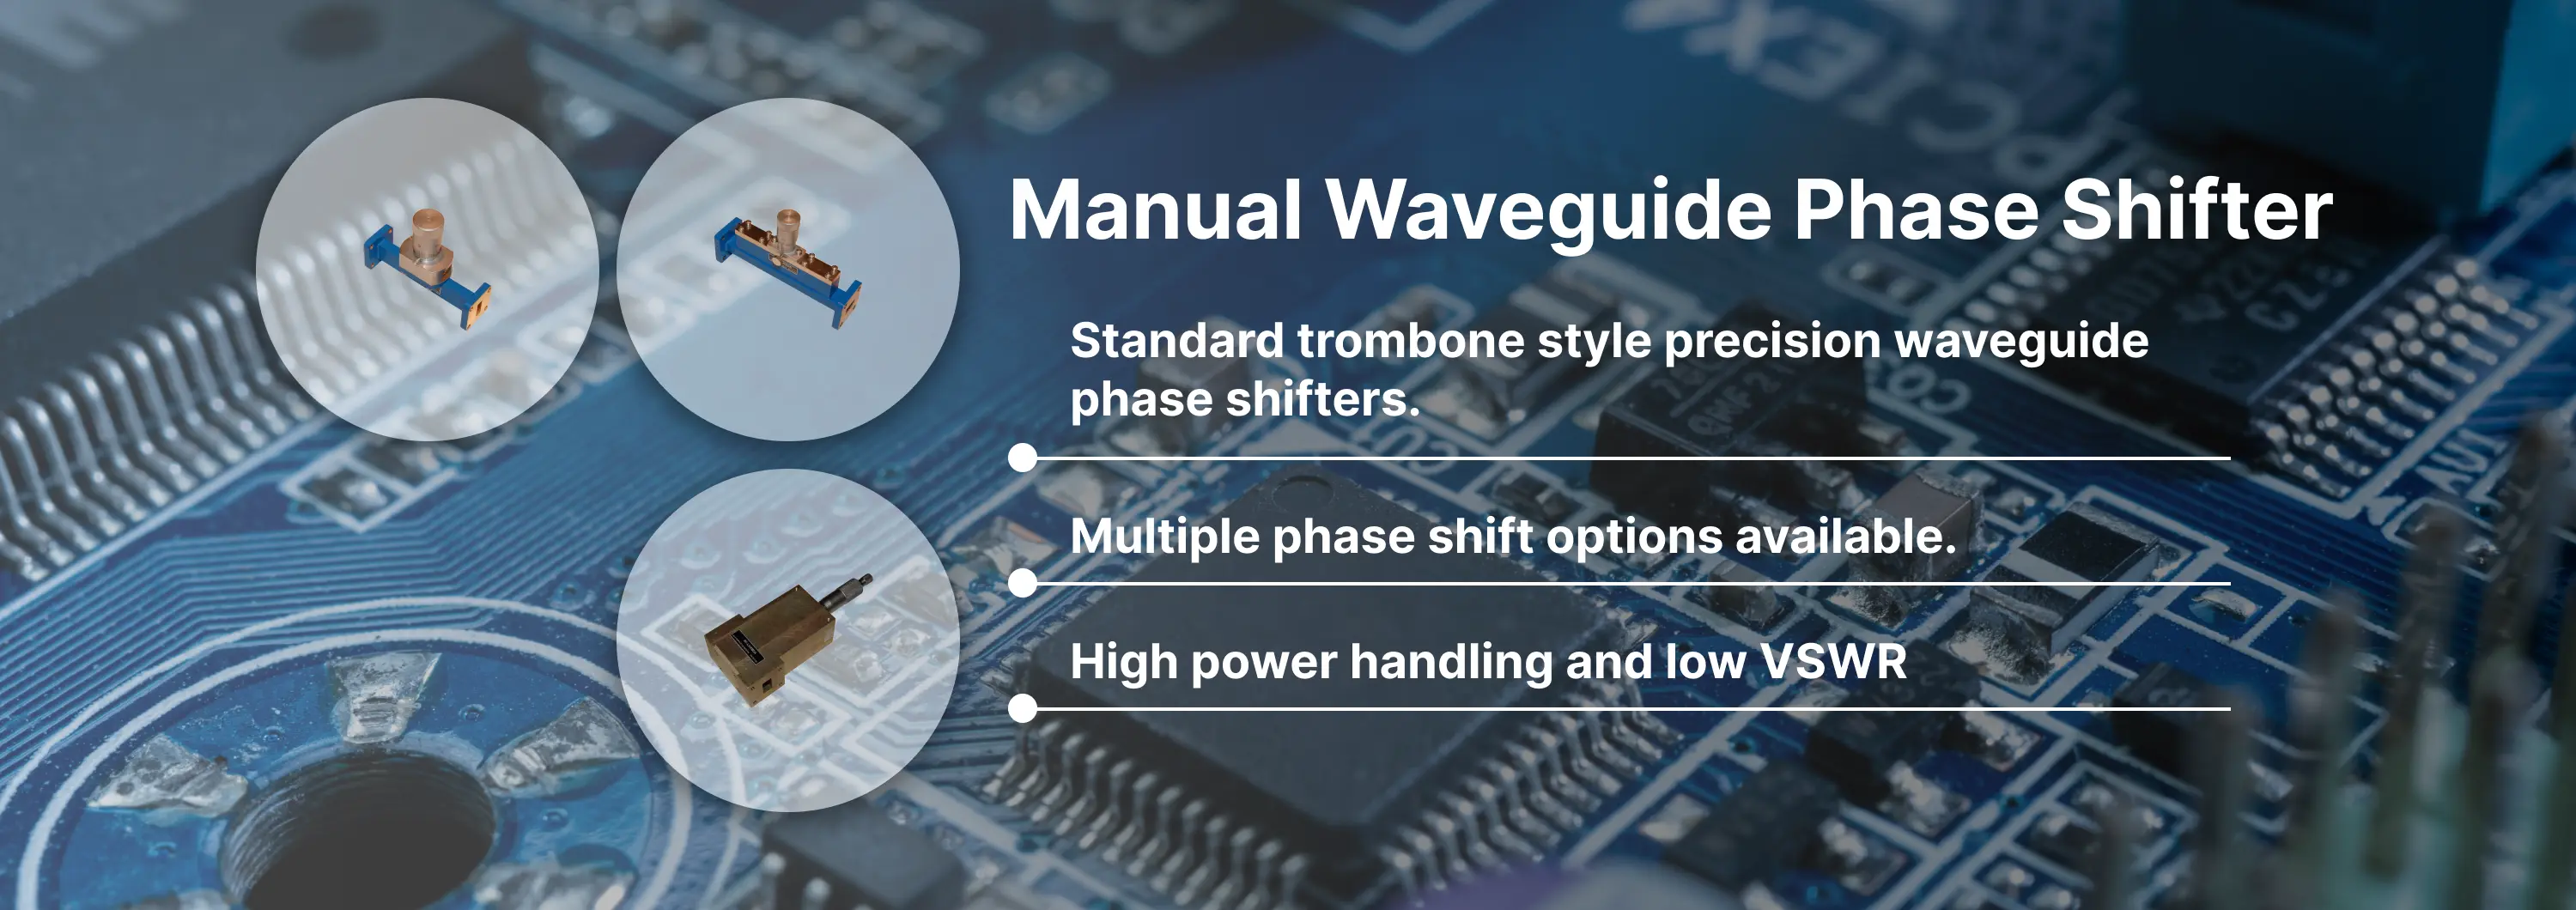 Manual Waveguide Phase Shifter Banner